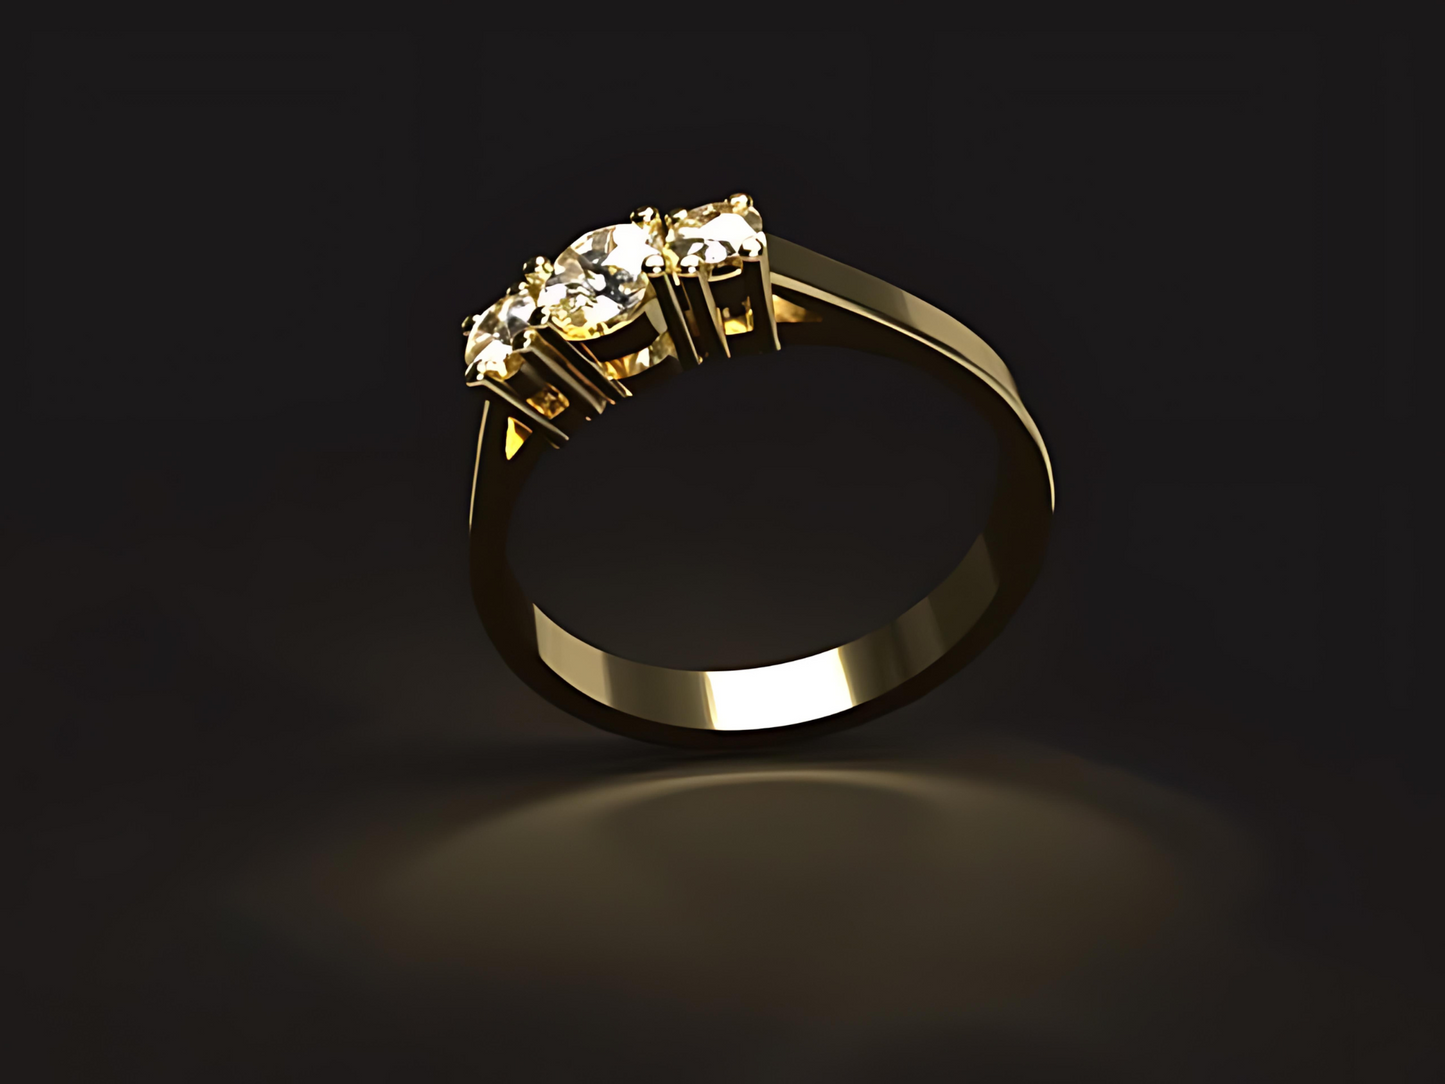 Handmade gold ring with natural 1 ct. Vs high quality Diamonds. Engagement trilogy ring. IGI certificate.